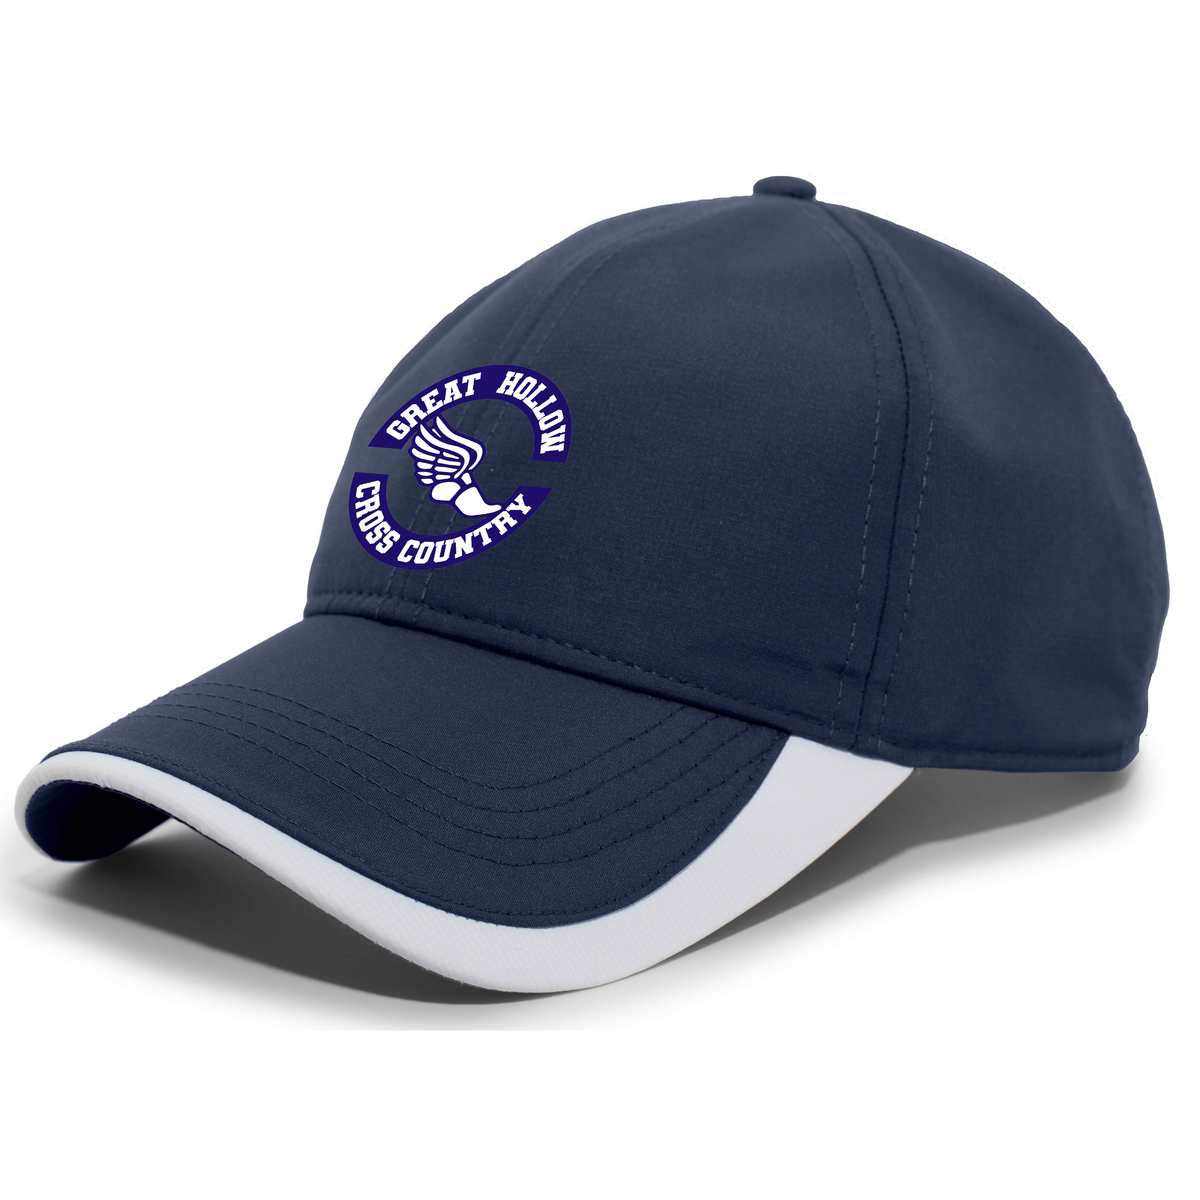 Great Hollow Cross Country Lite Series Cap With Trim